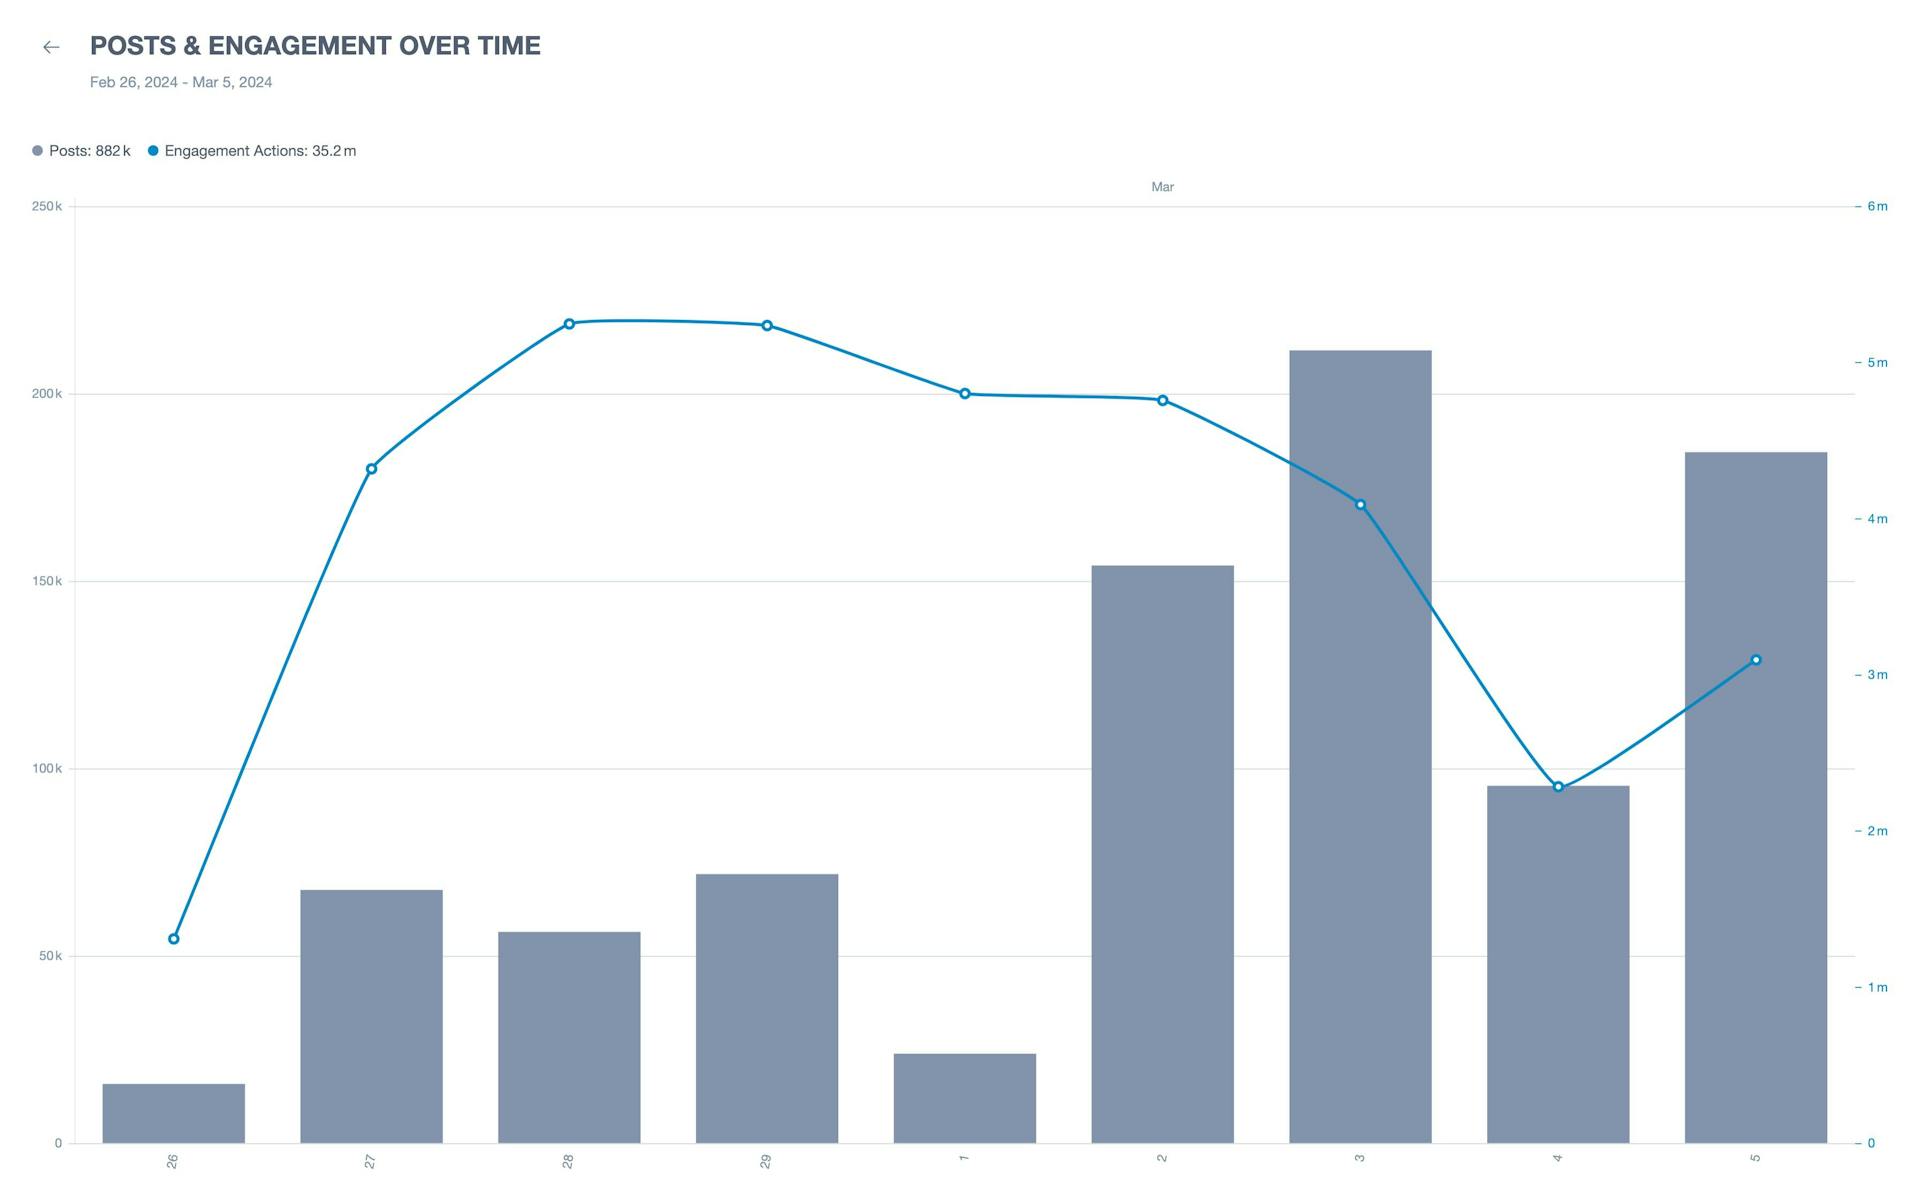 A bar and line chart comparing volume of posts against engagement over time.